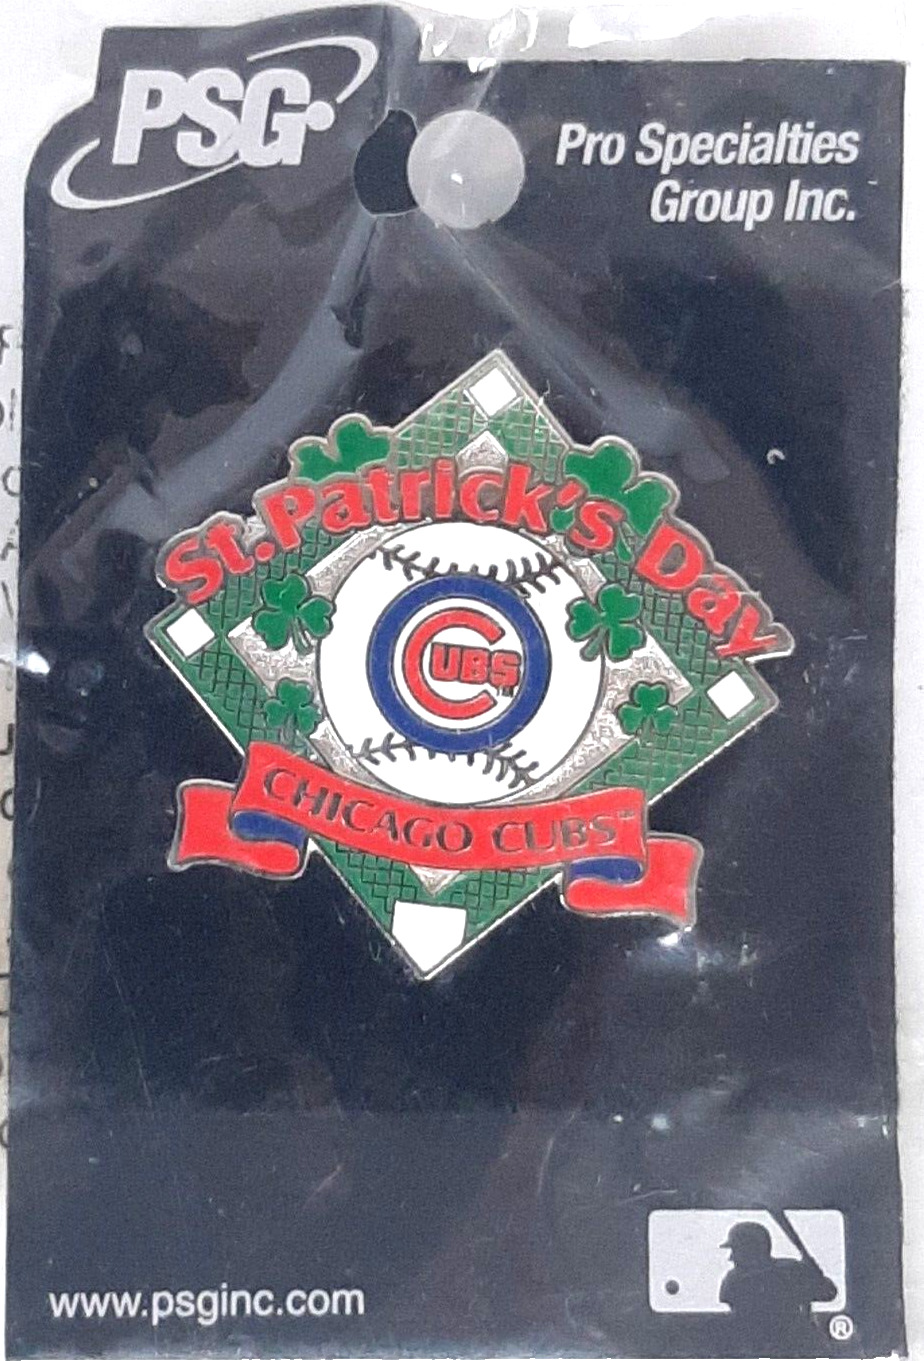 Chicago Cubs Baseball St. Patricks Day PSG Pro Specialties Group Collectible Pin